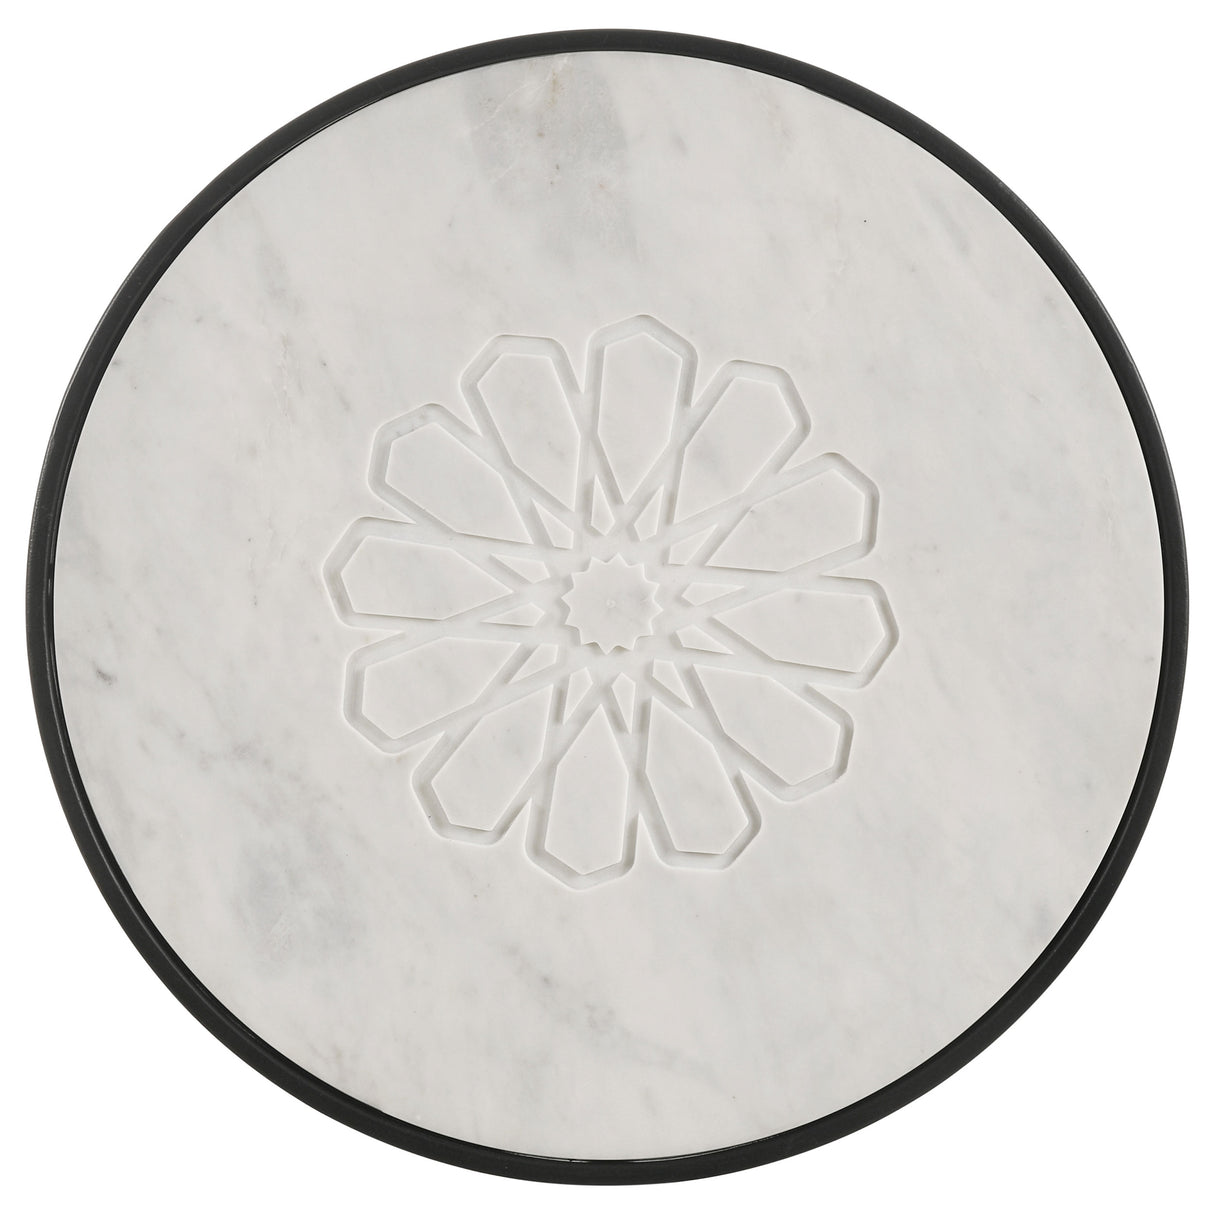 Side Table - Kofi Round Marble Top Side Table White and Black